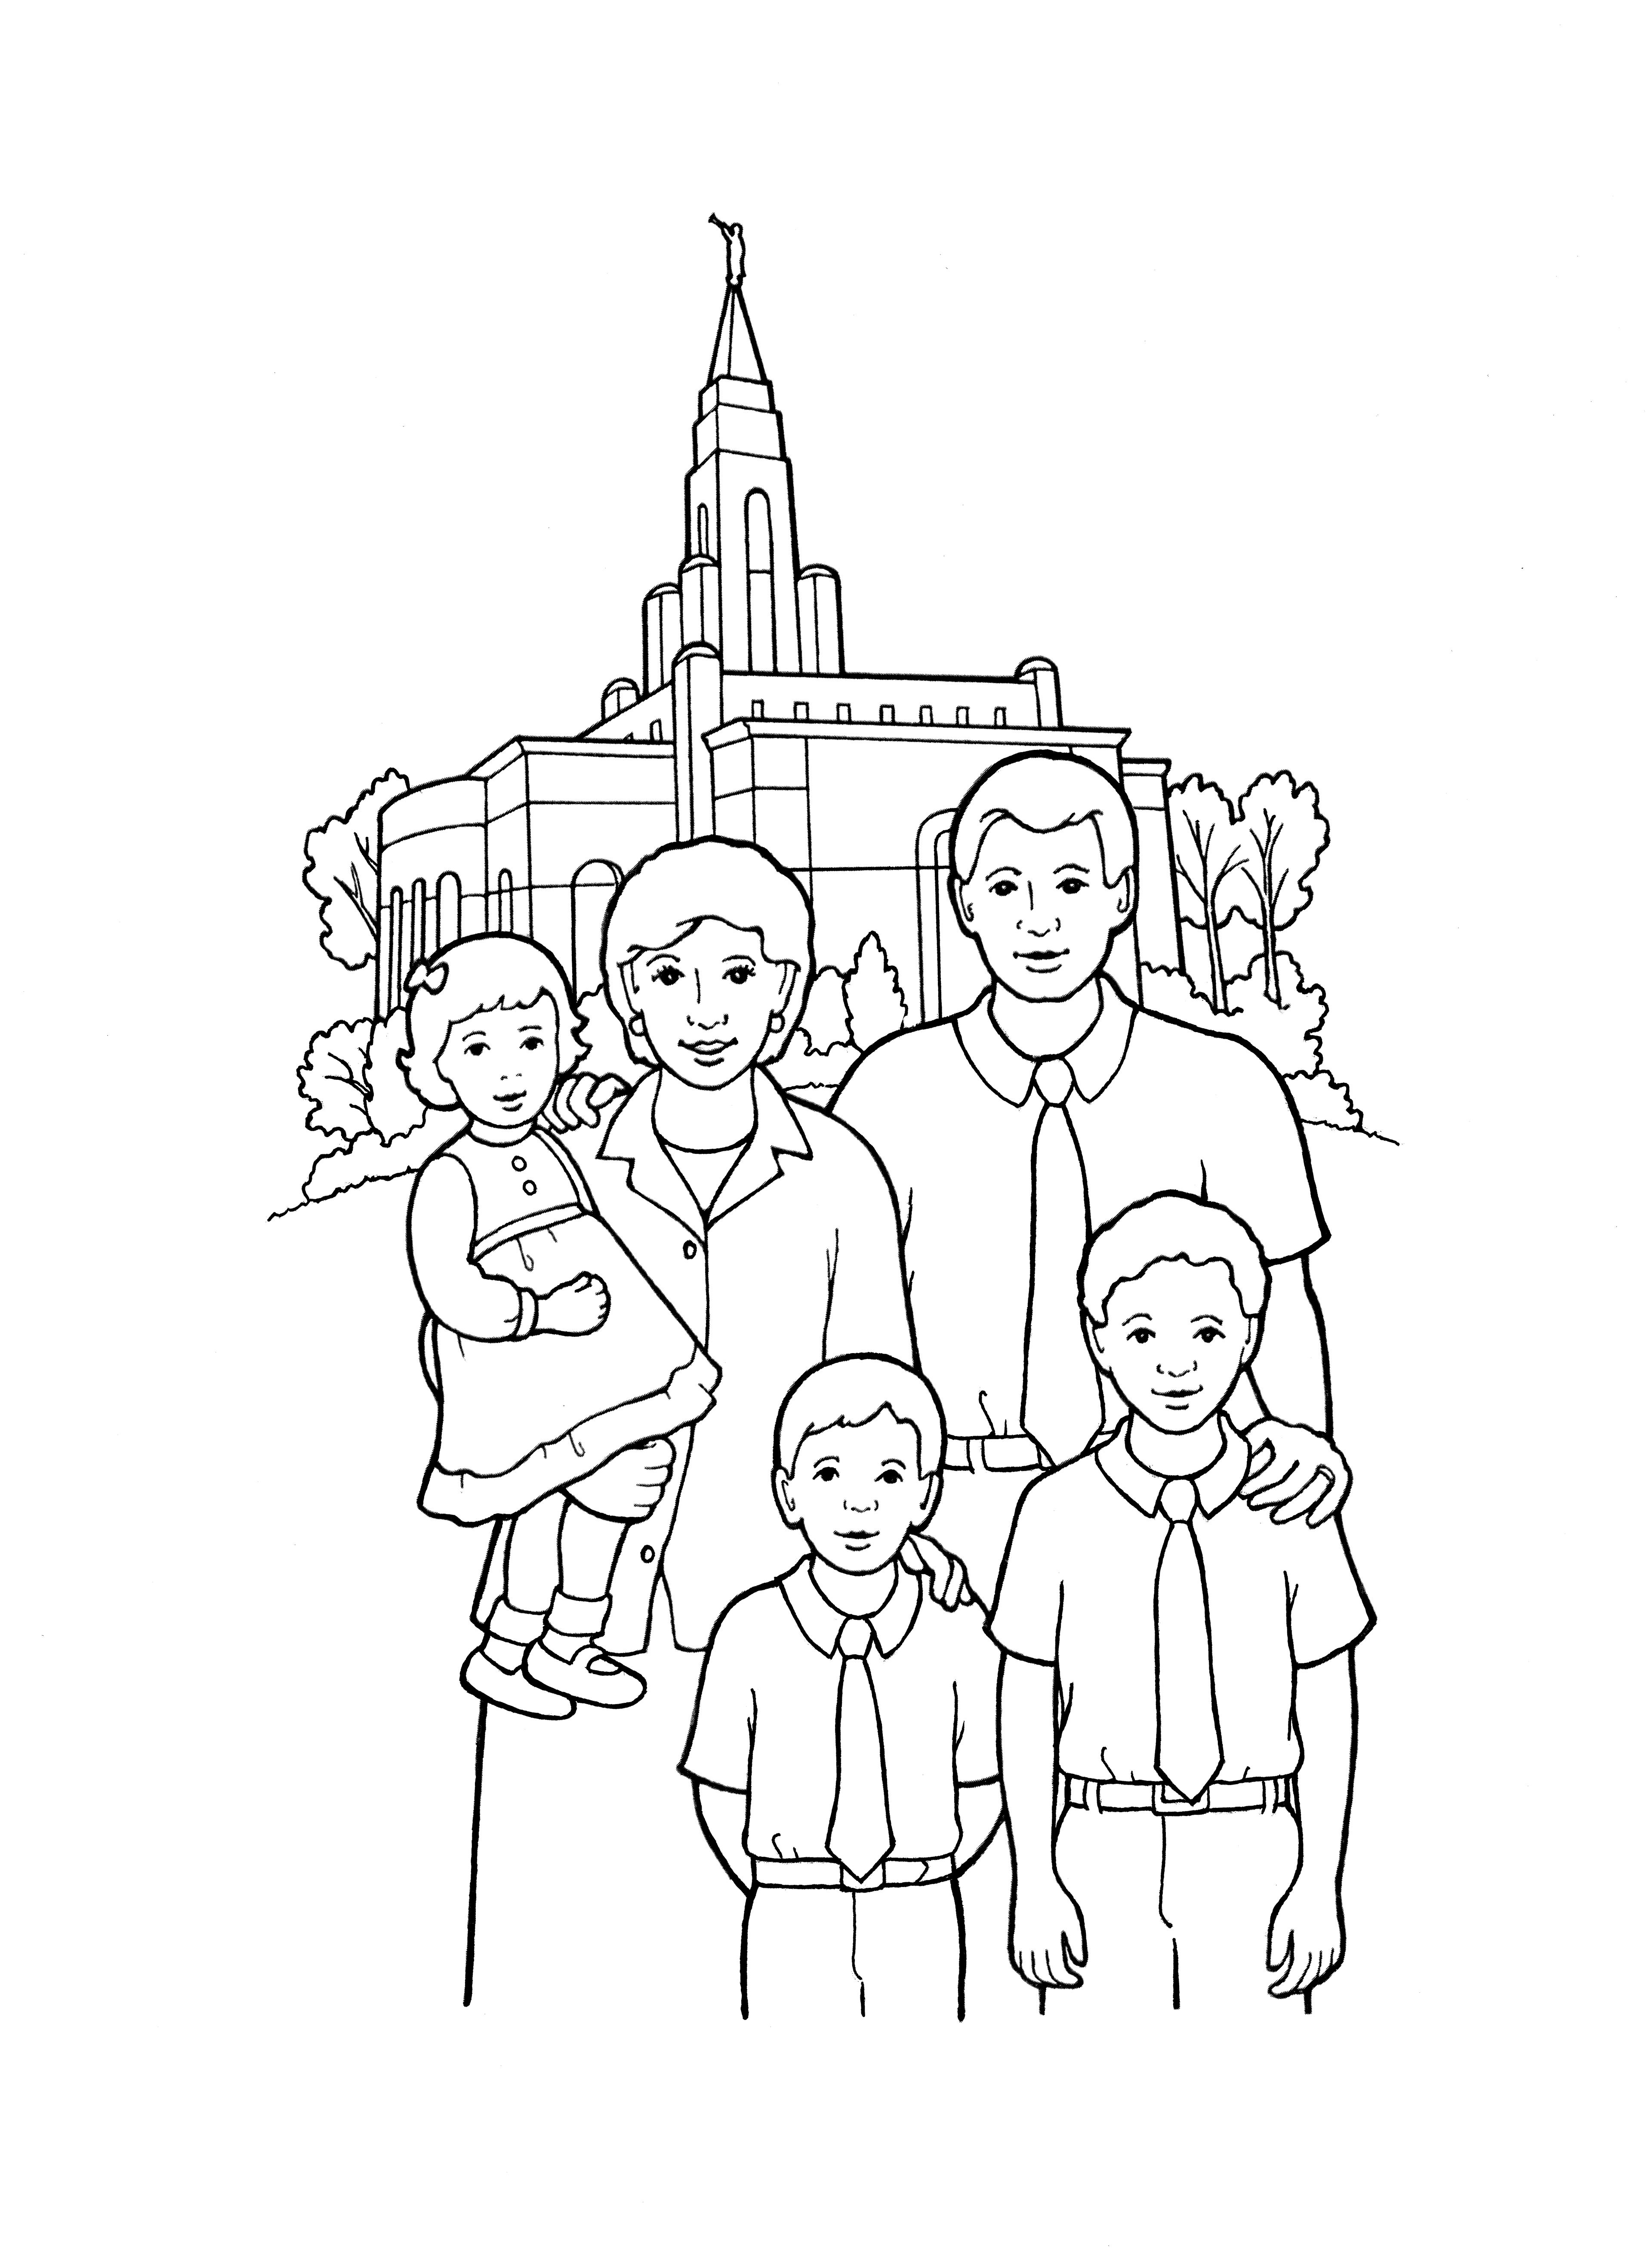 An illustration of a family standing in front of a temple.